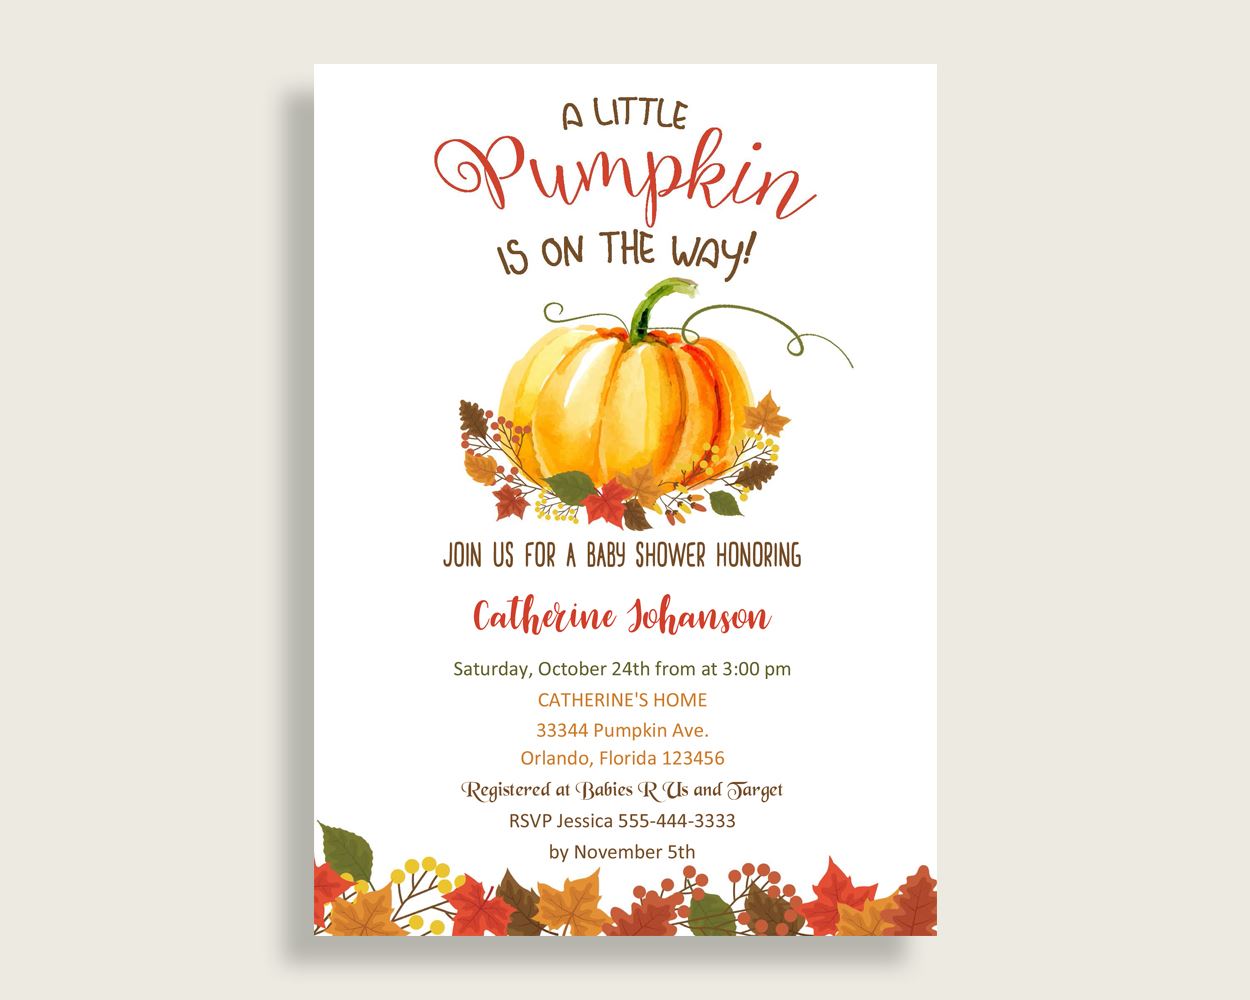 Invitation Baby Shower Invitation Fall Baby Shower Invitation Baby Shower Pumpkin Invitation Orange Brown printables party plan shower BPK3D - Digital Product